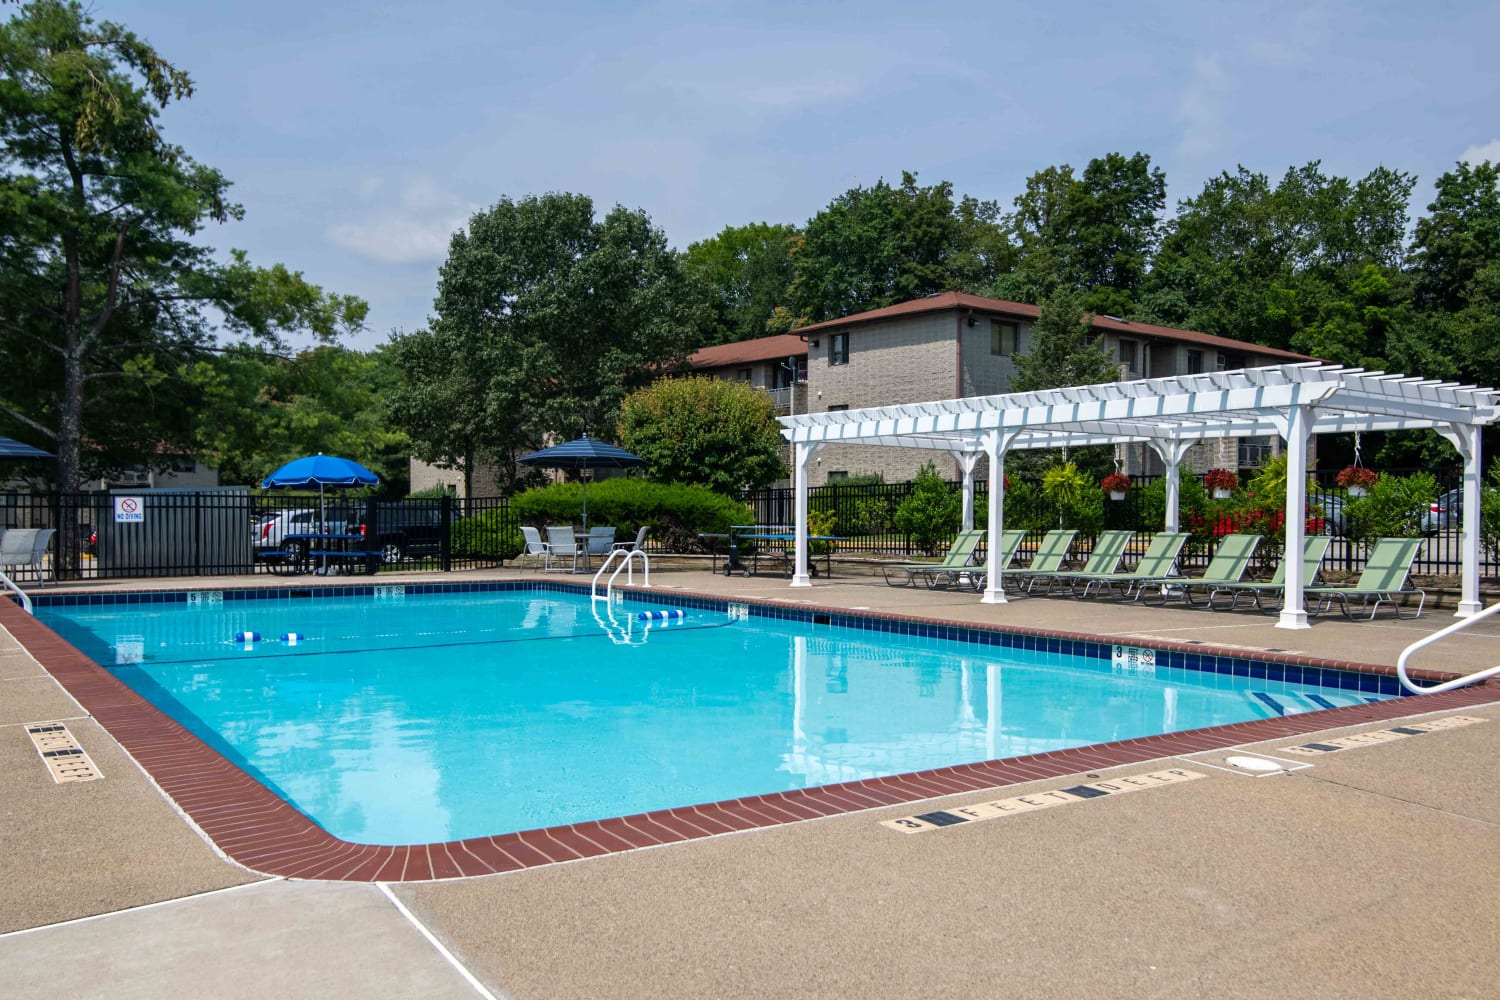 Swimming pool at Imperial Gardens Apartment Homes in Middletown, NY